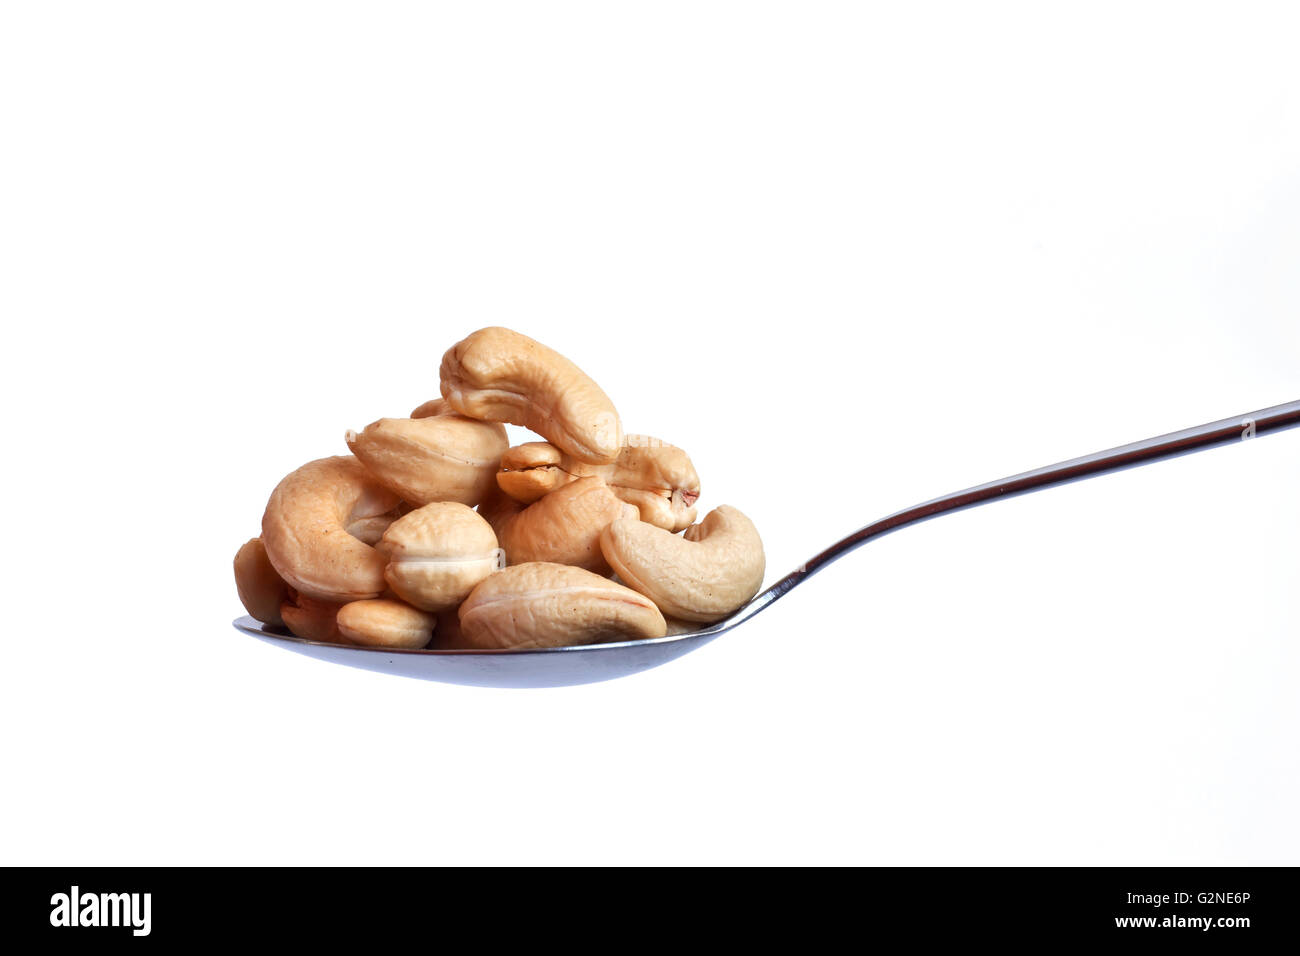 Spoonful of cashew nuts on white background Stock Photo